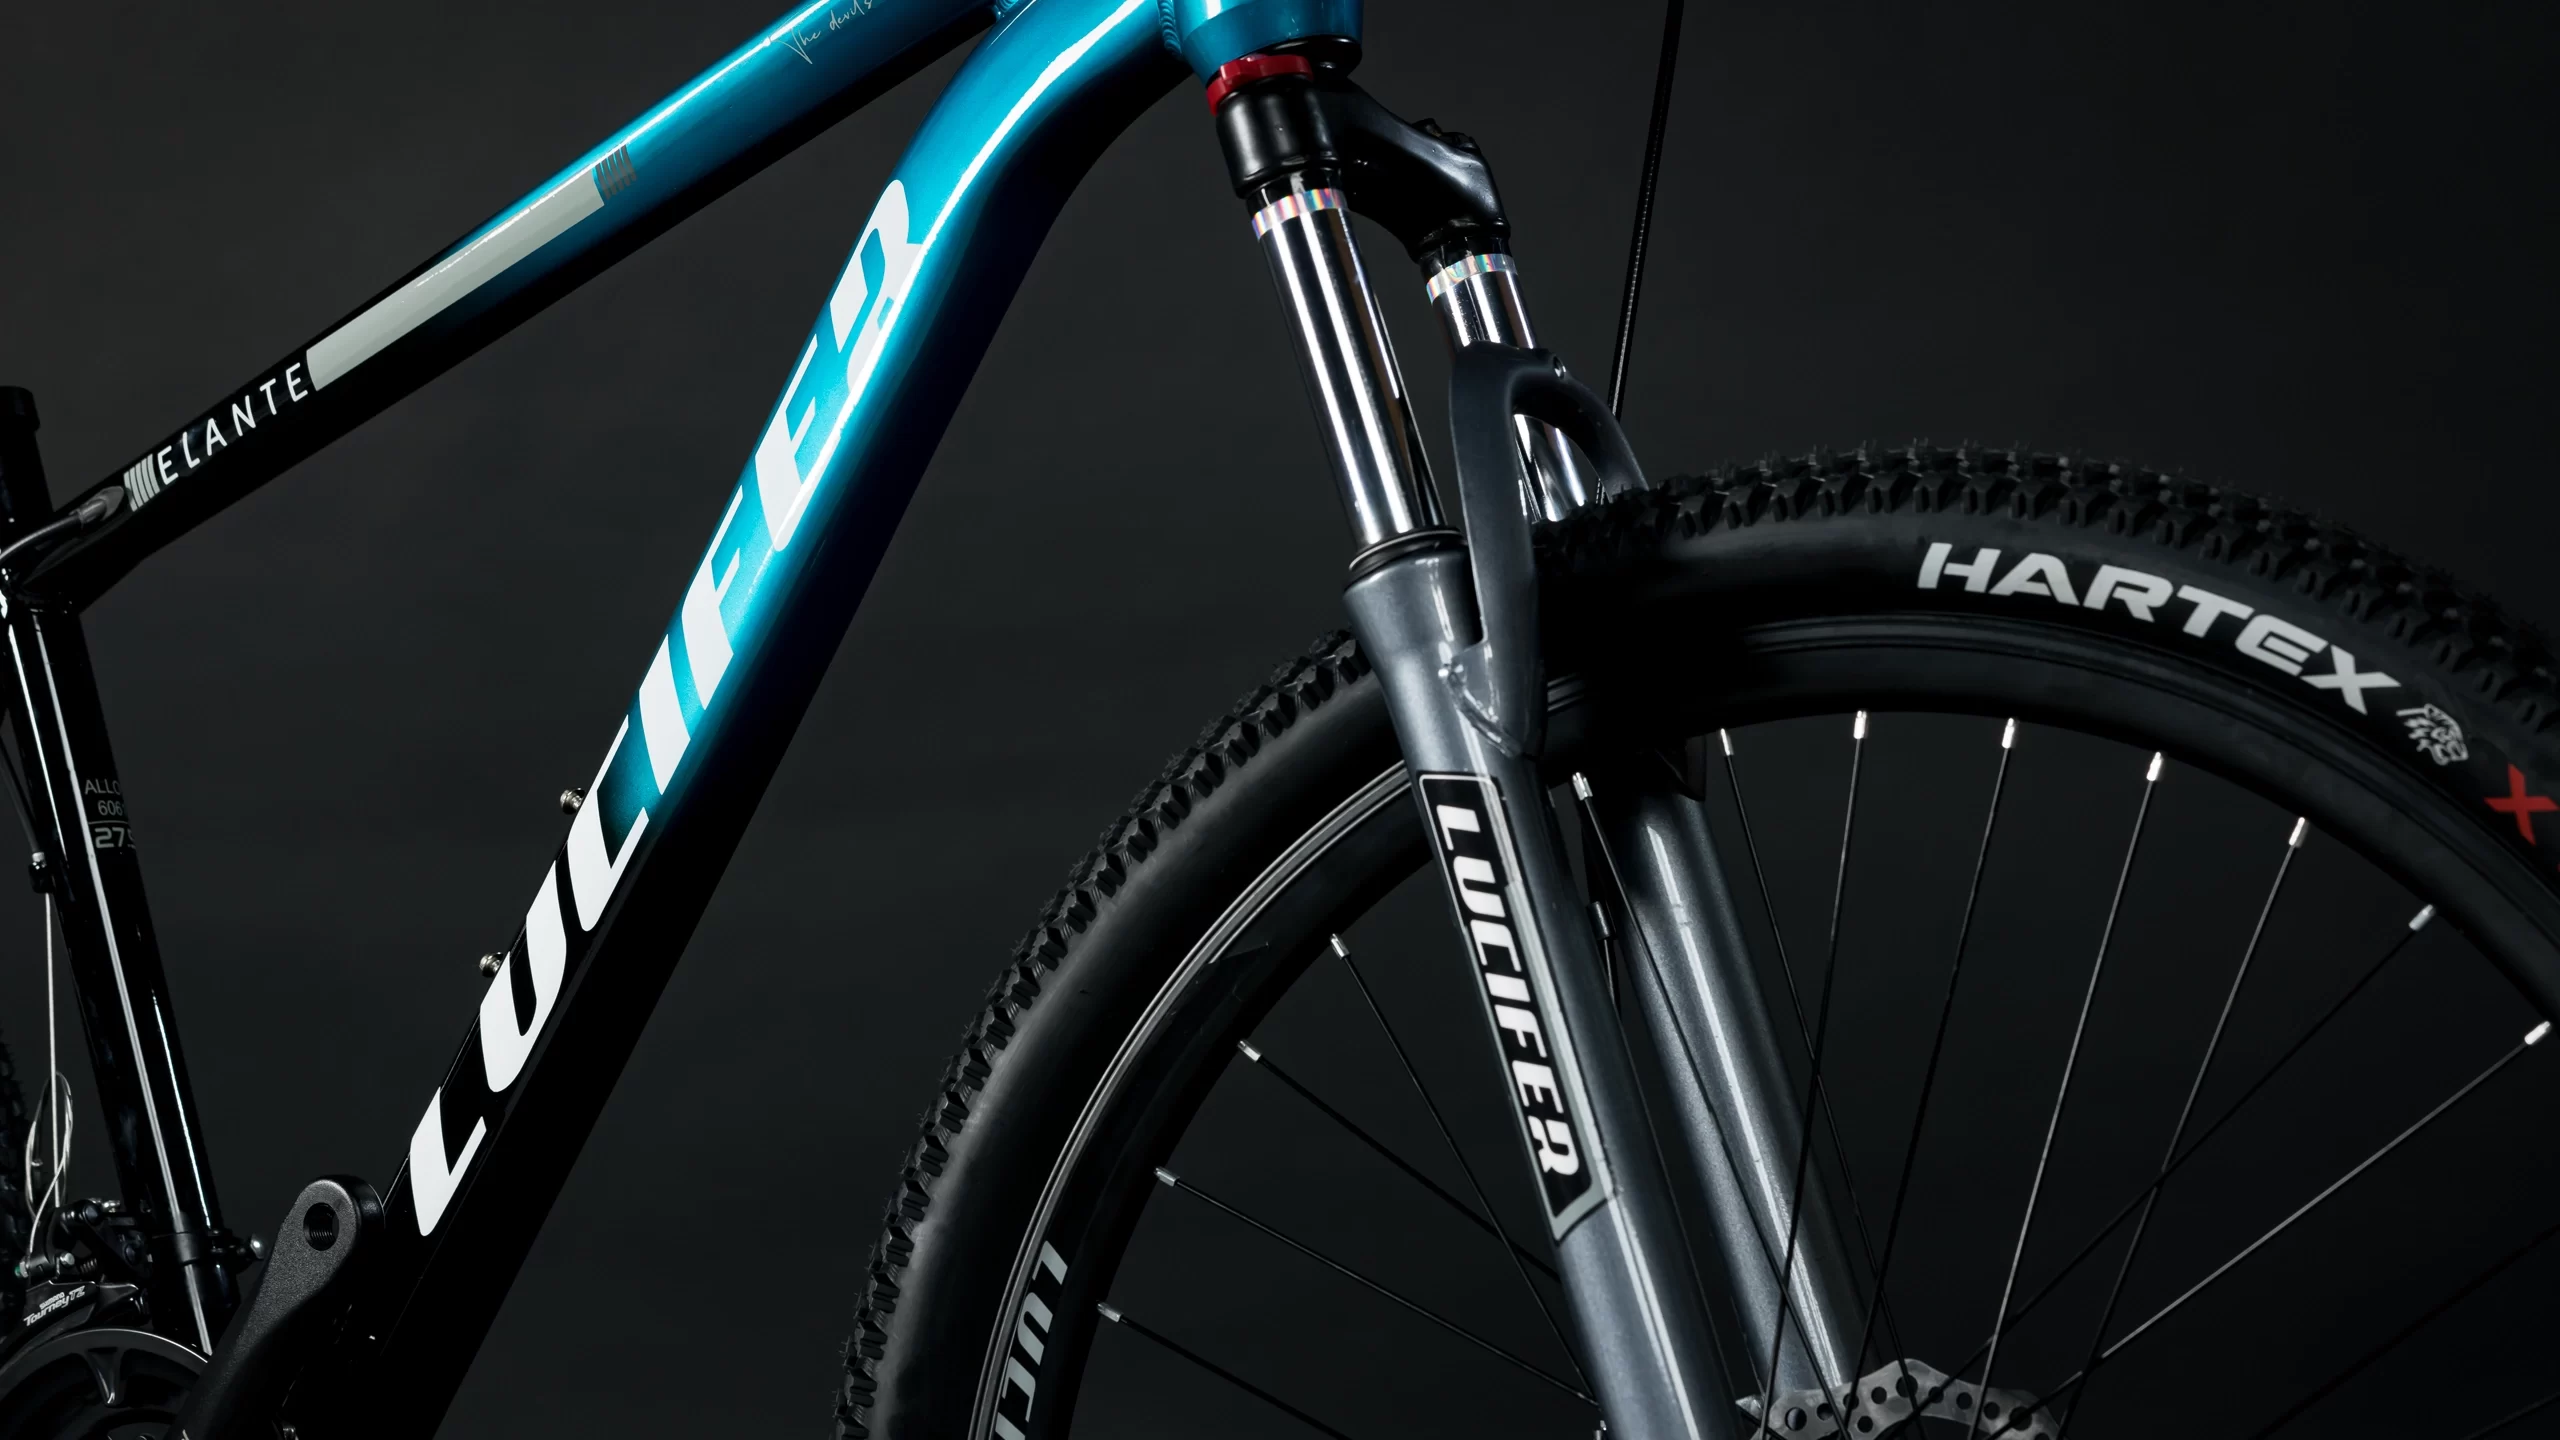 Suspension fork of Most Affordable Alloy Cycle Brand in India